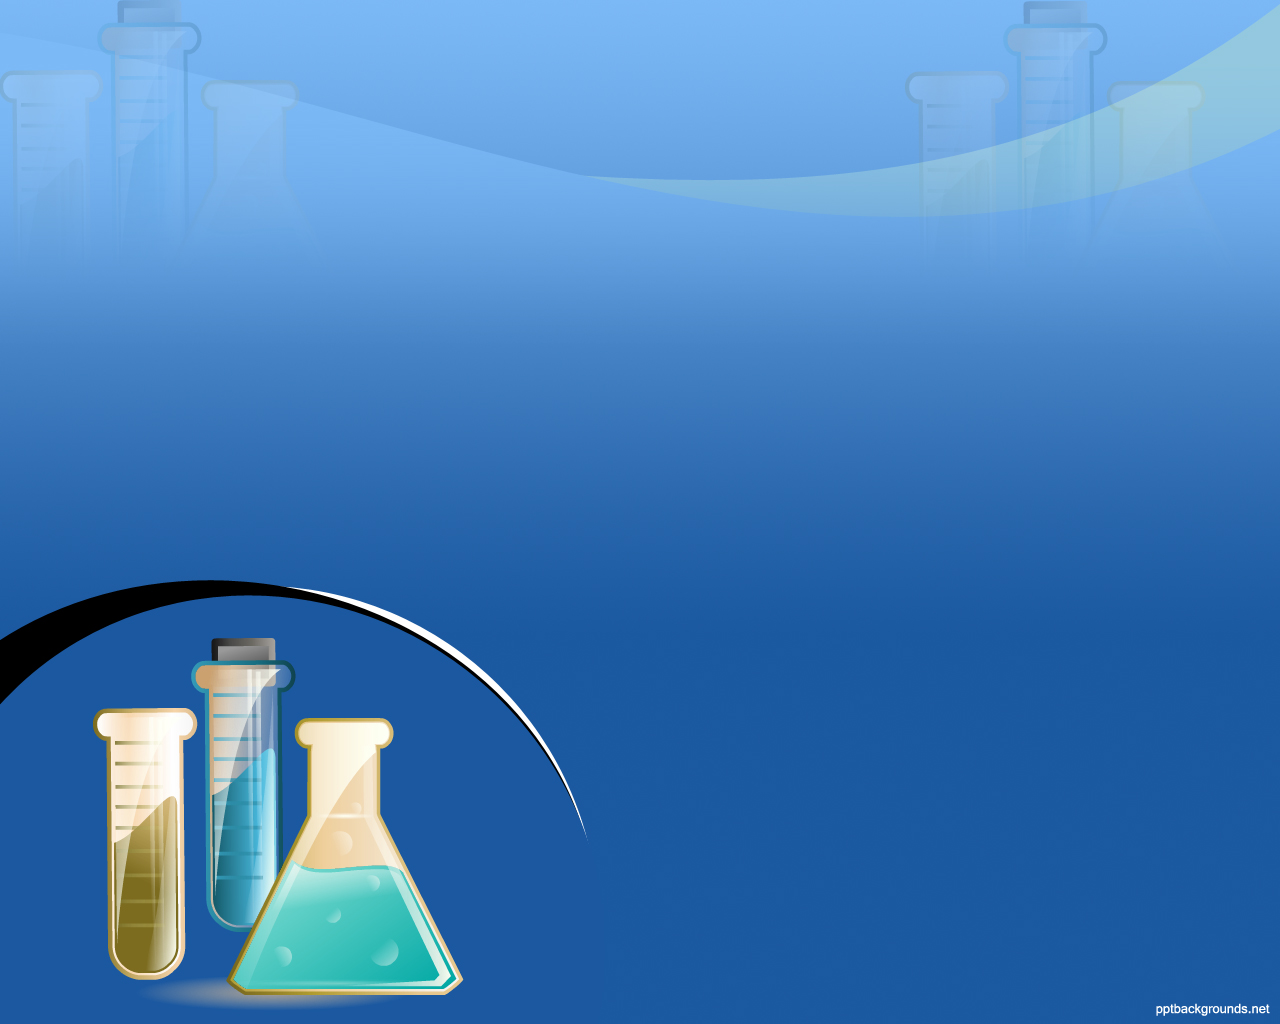 Free Basic Food Science Backgrounds For PowerPoint   Science PPT